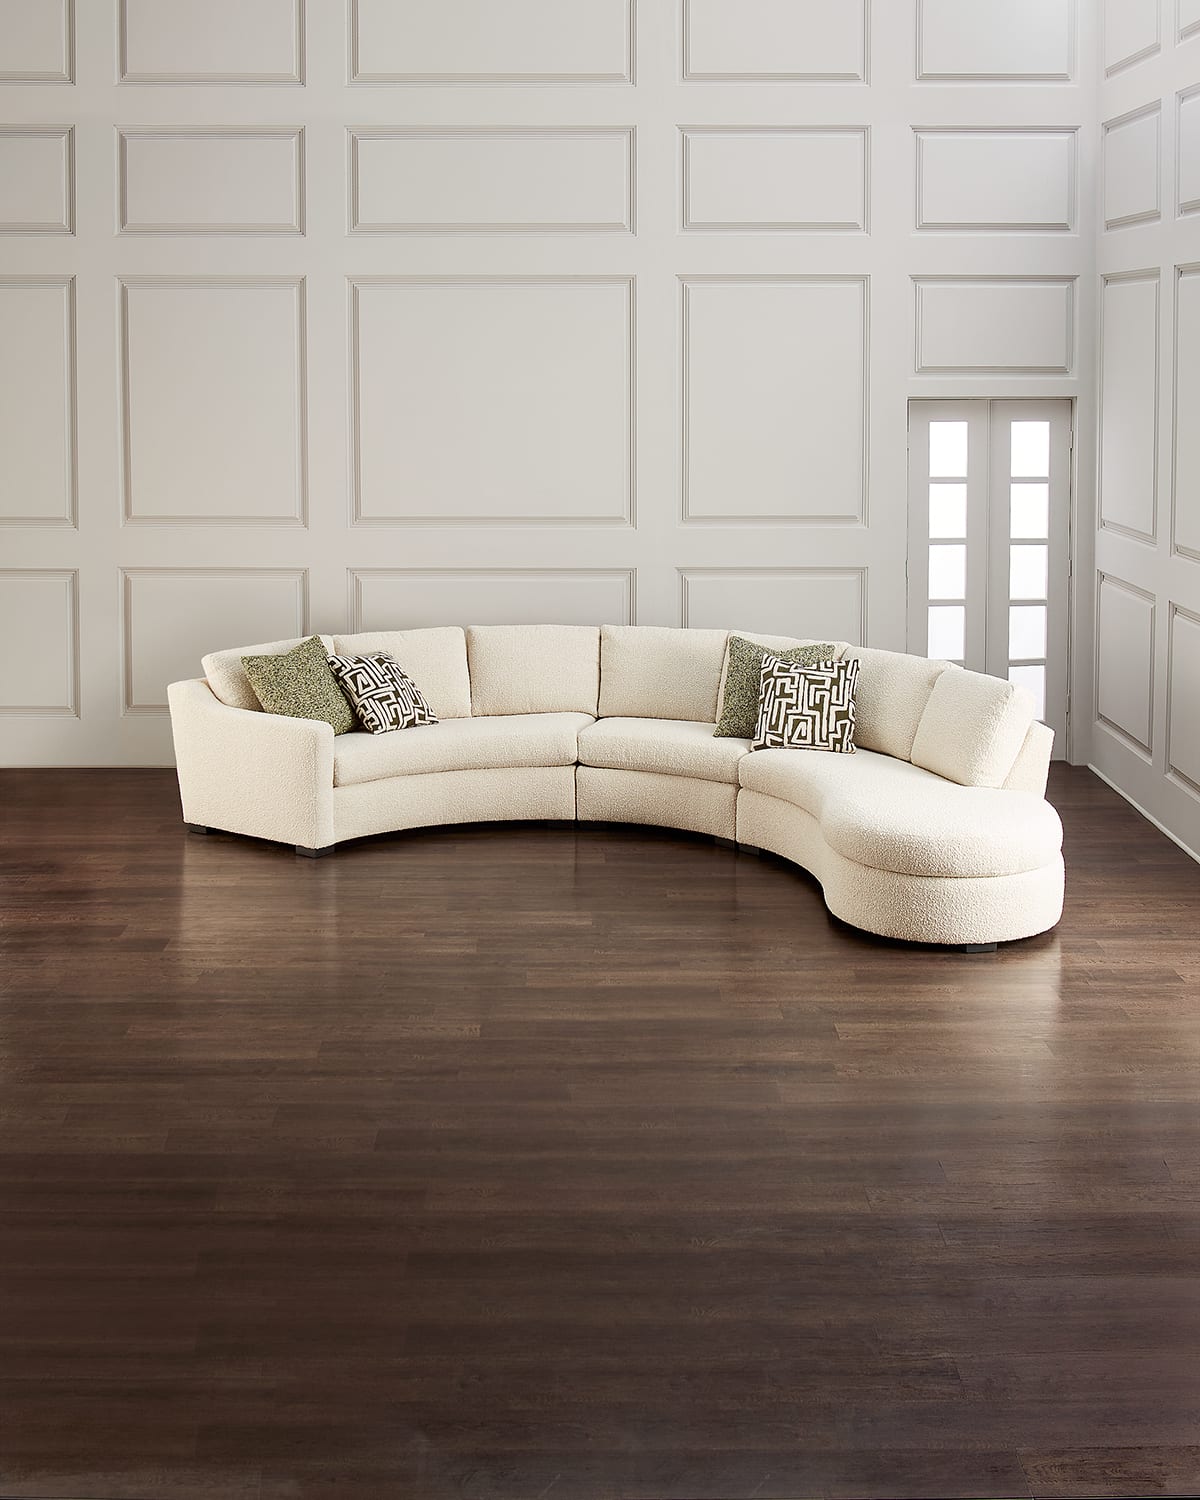 Larrabee Curved Sectional